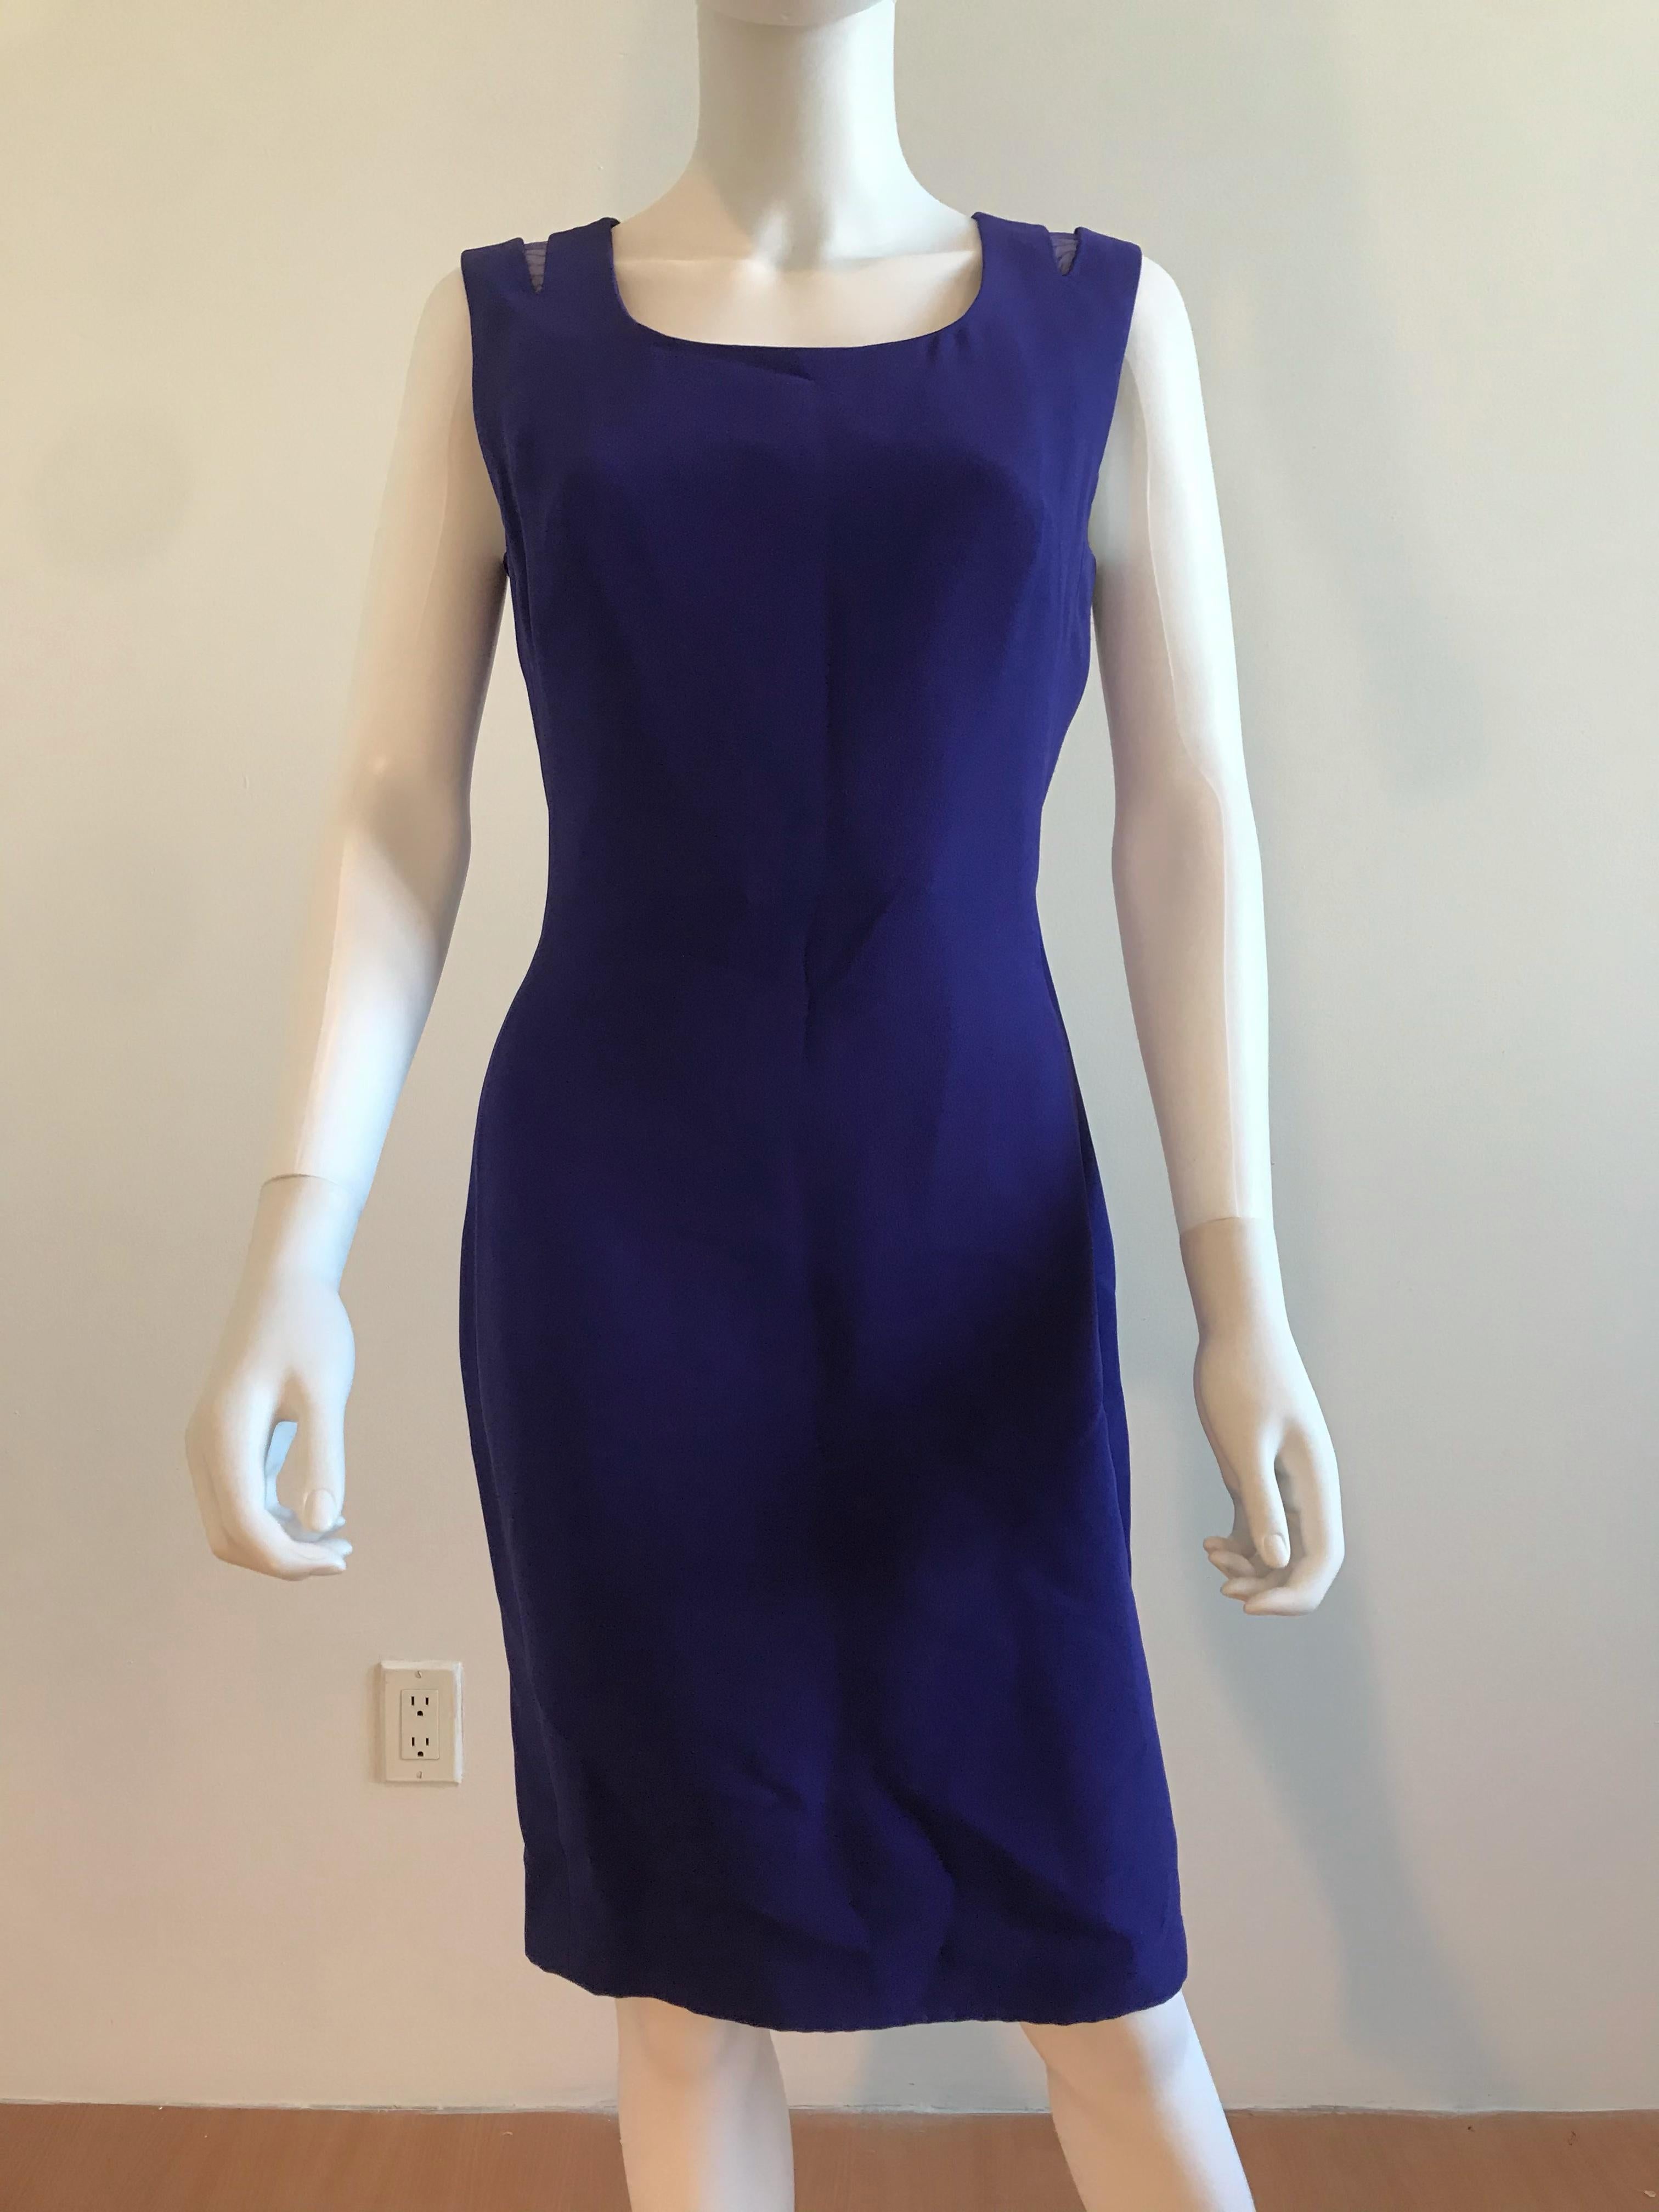 A luxe vintage Gianni Versace Couture purple dress. This sleeveless showstopper has a scoop neckline and purple mesh insets in place of the shoulder cutouts. The dress is fully lined in silk, has inner boning corset, and has a zipper enclosure in